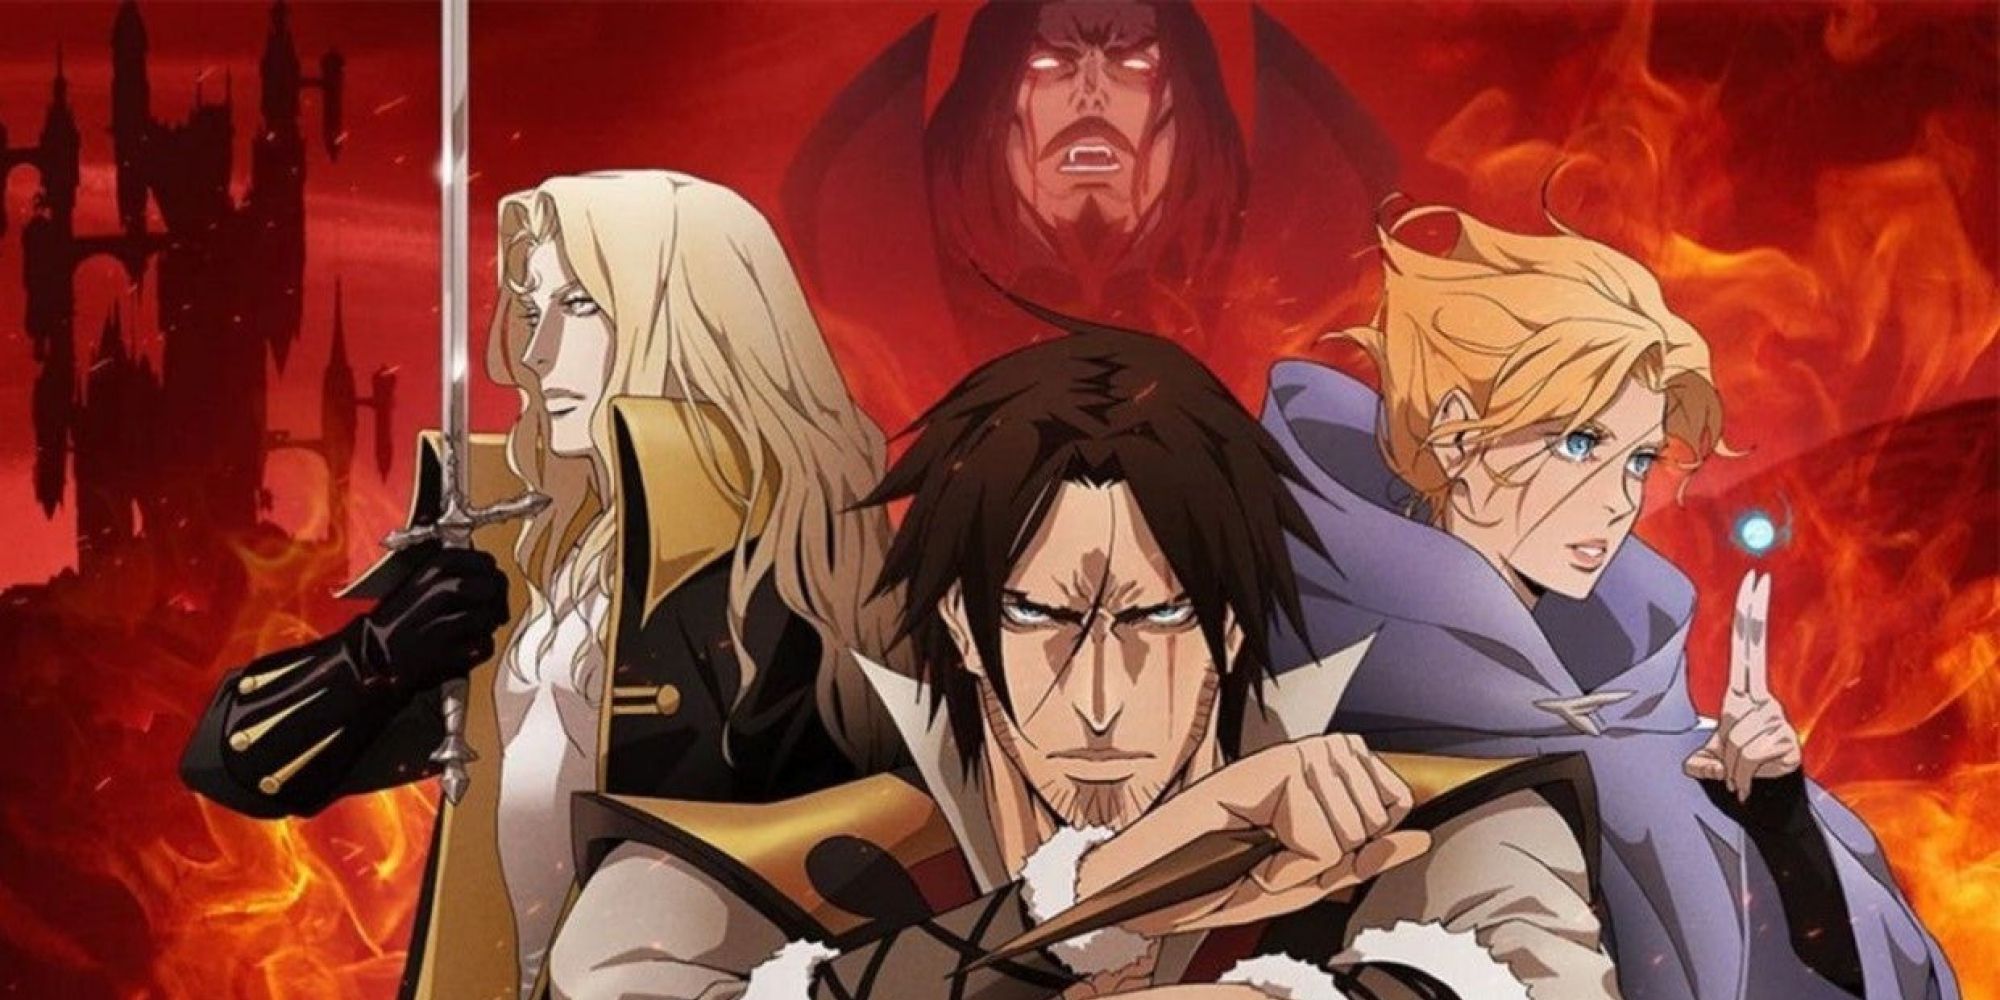 Alucard, Trevor, and Sypha in battle poses before Dracula on a fiery backdrop